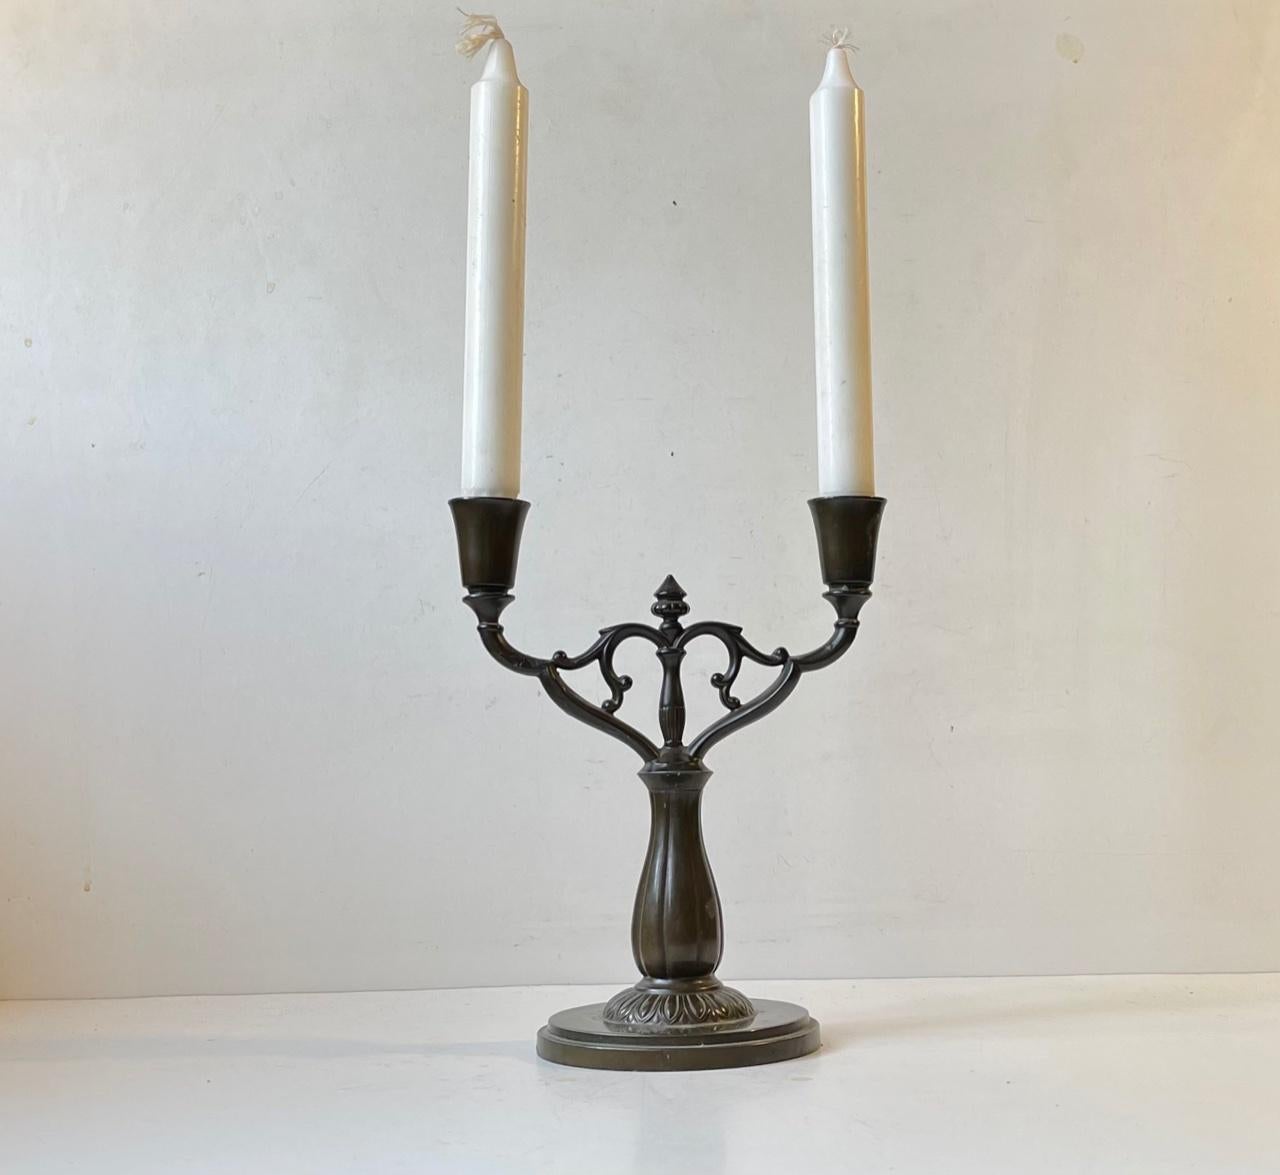 Large candelabra in disko metal by Just Andersen. Manufactured during the 1930s in his workshop in Copenhagen. This is design/model 74 and it features an architecturally fluted stem and 'stained' base. Its stamped and numbered by the maker to the